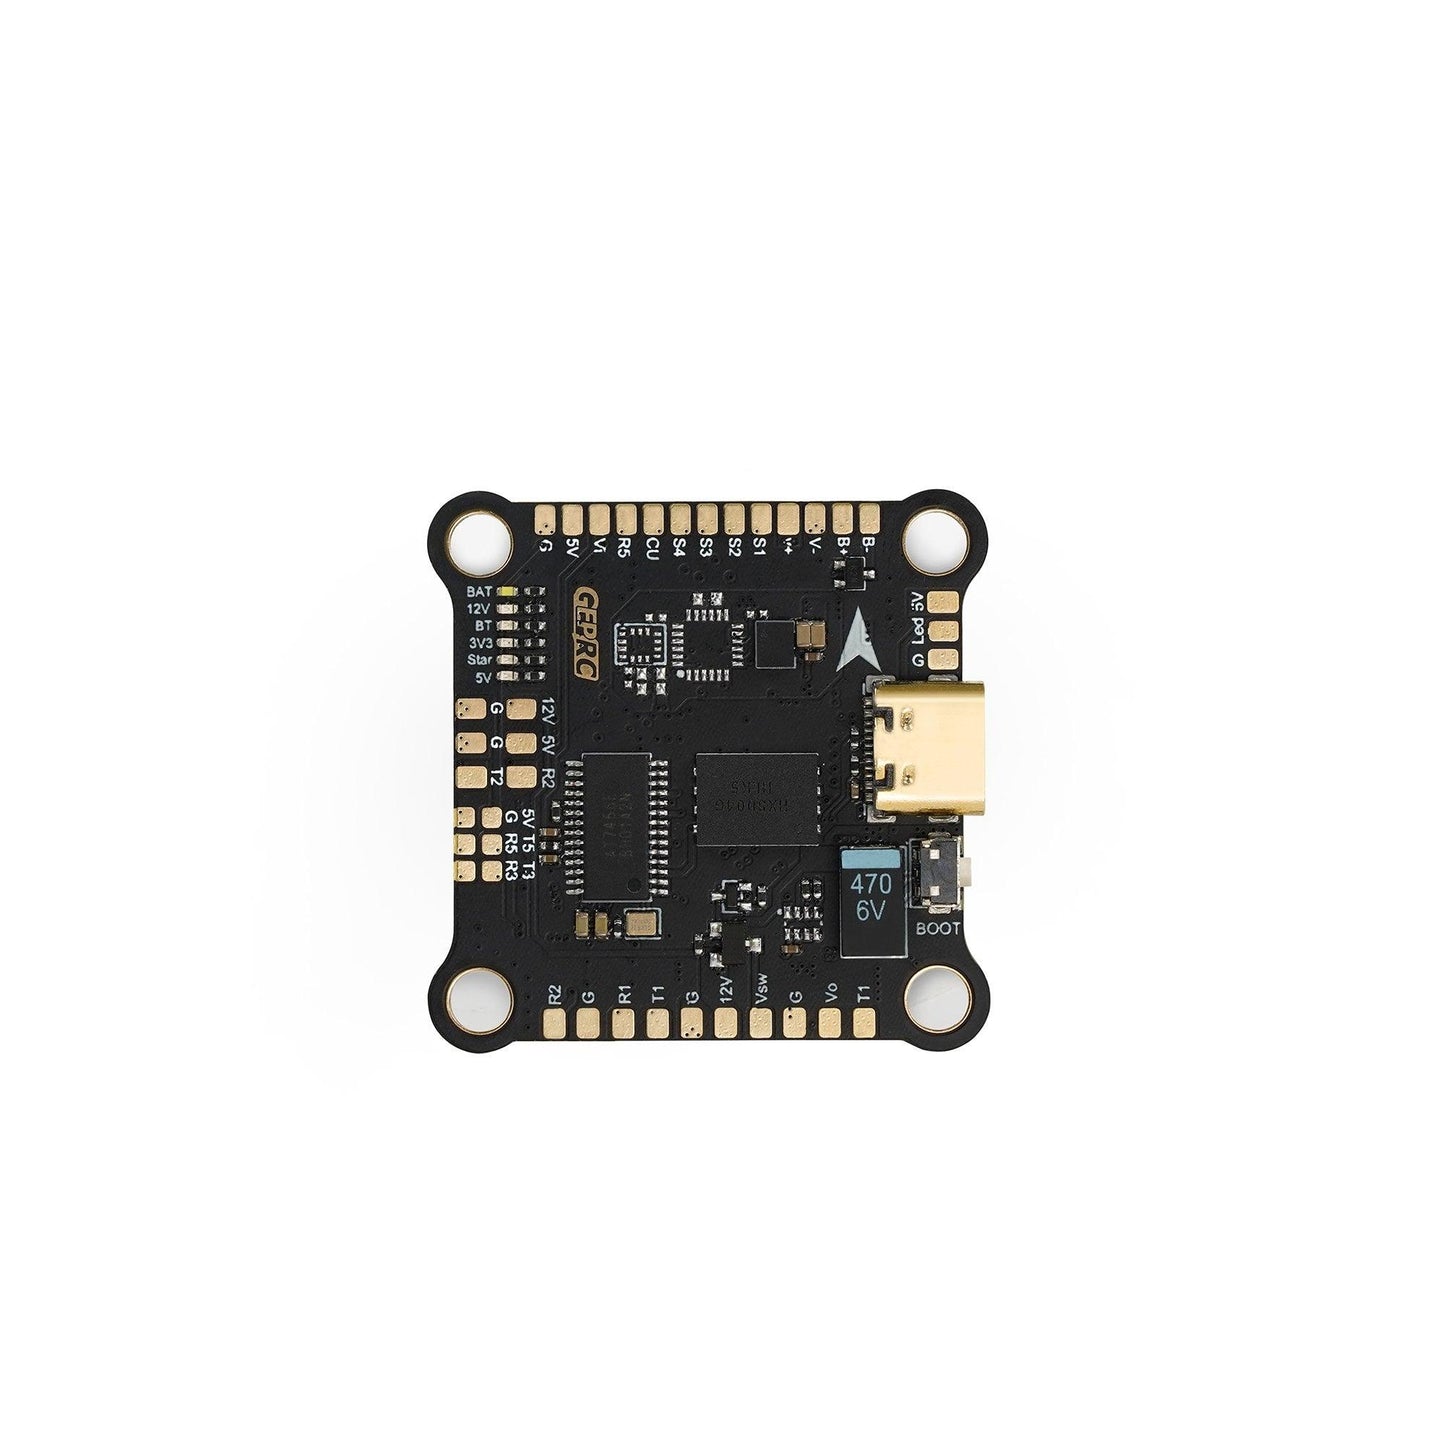 GEPRC SPAN F722-BT-HD V2 Stack - Flight Controller Stack F7 BL32 50A 96K 4IN1 ESC SUPPORT BLUETOOTH PARAMETER TUNING - RCDrone